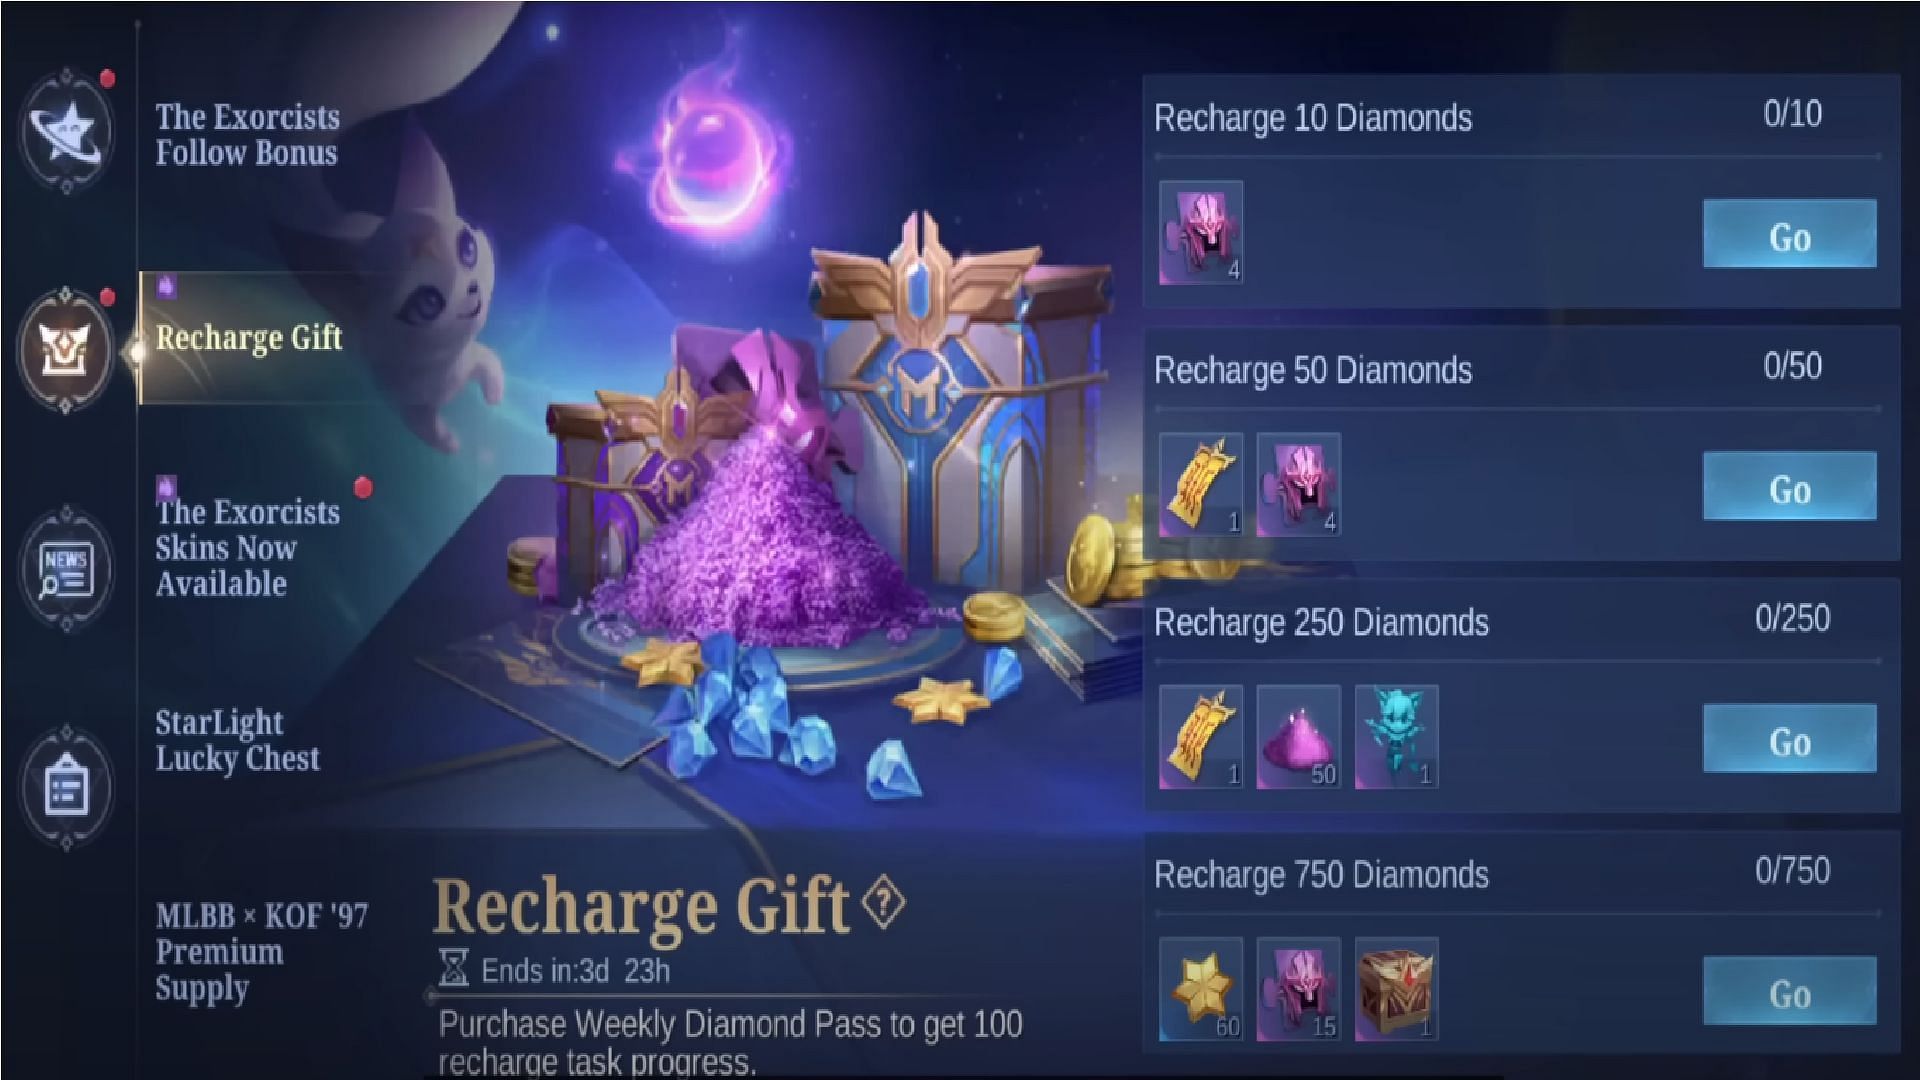 You can get two free Sigil tokens by recharging 300 Diamonds (Image via Moonton Games)